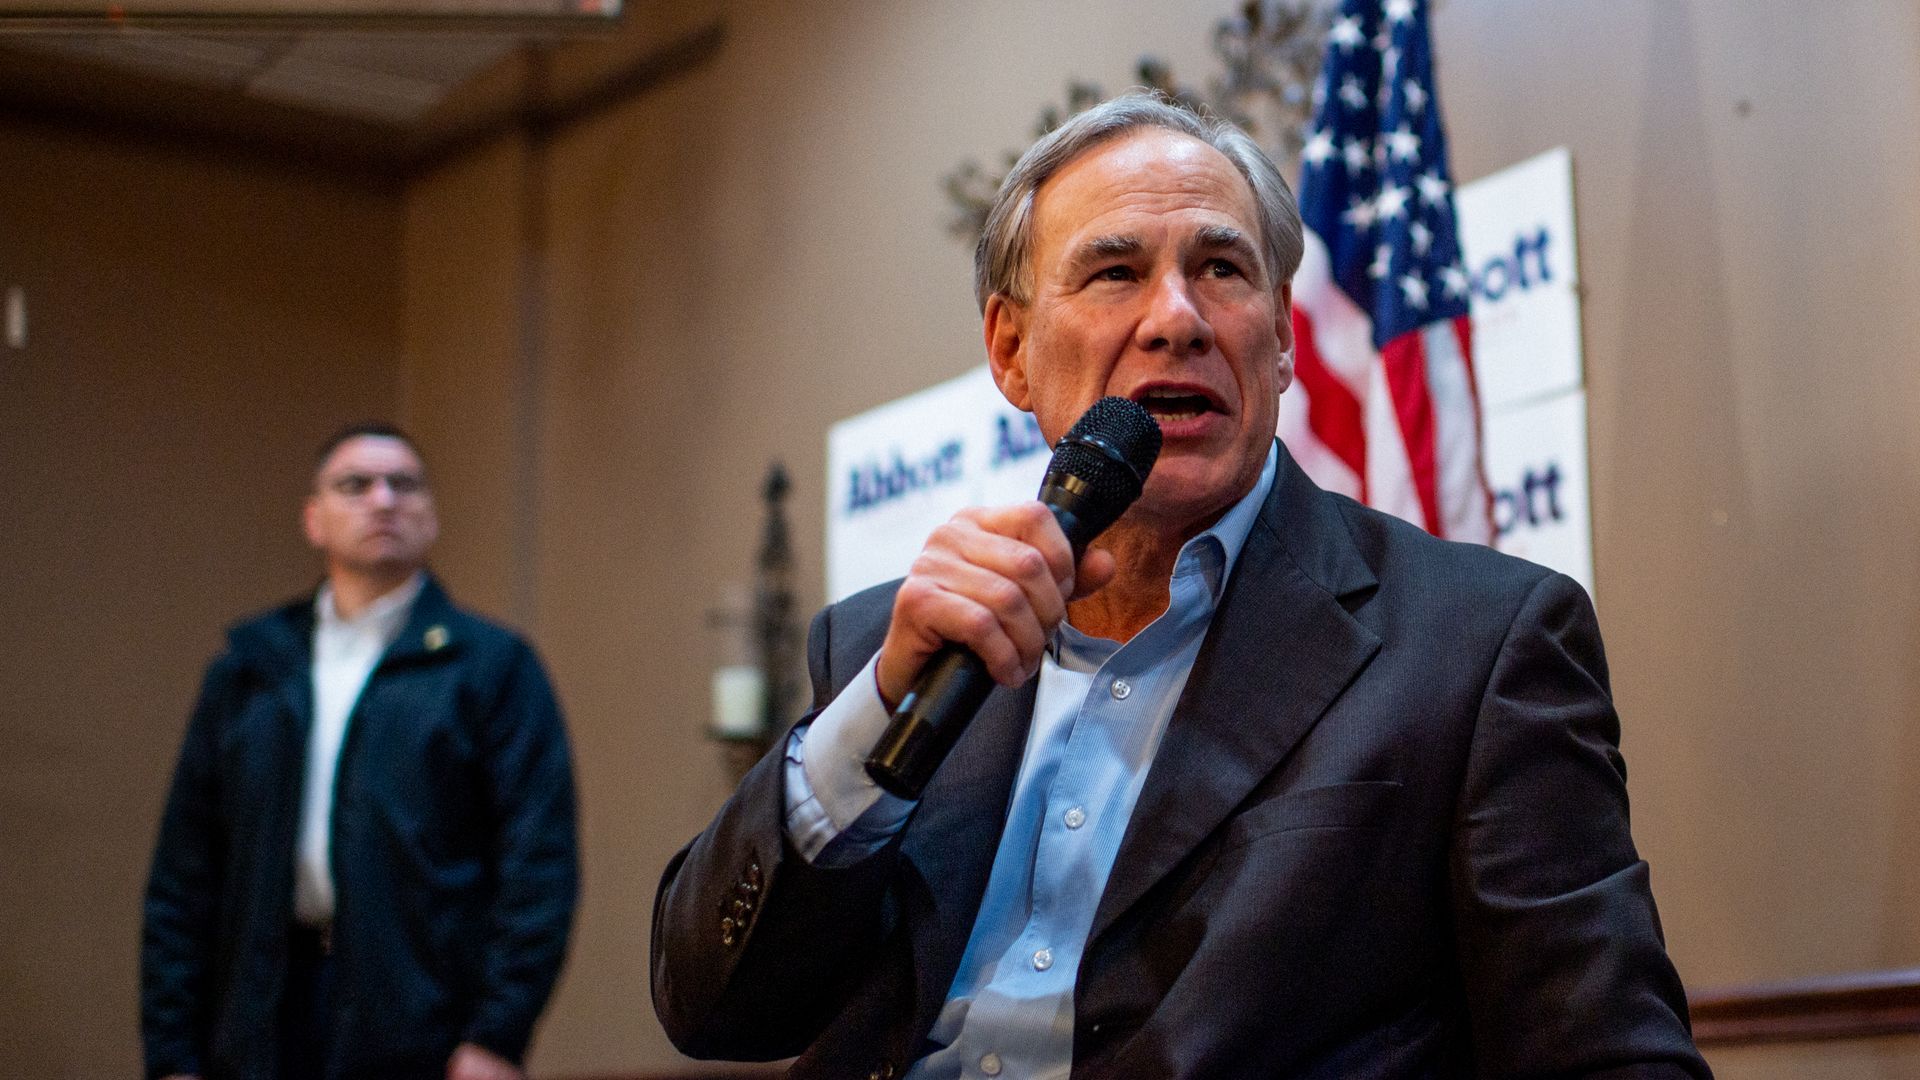 Texas Gov. Greg Abbott speaks during the 'Get Out The Vote' campaign event on February 23, 2022 in Houston, Texas